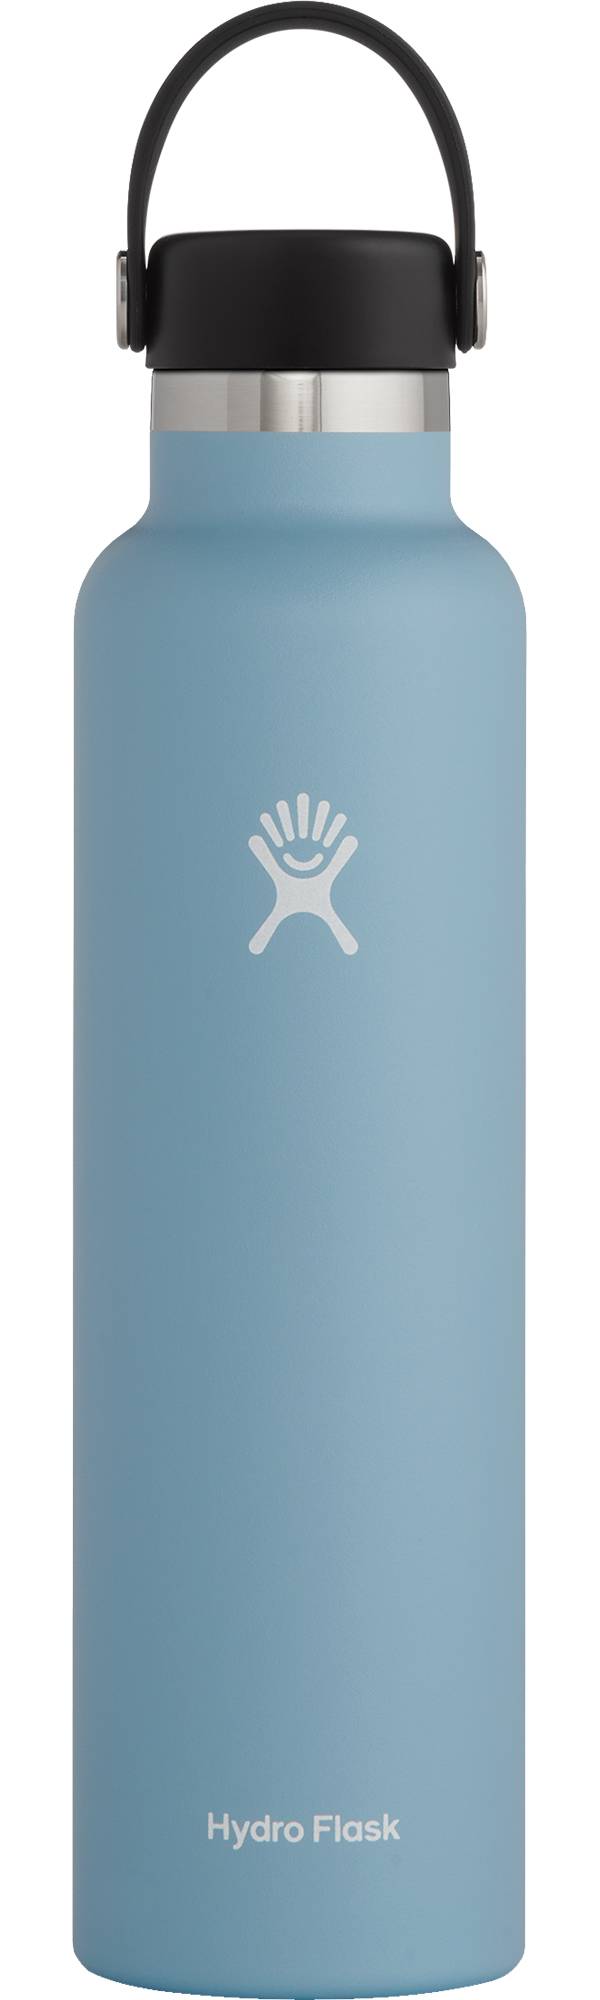 24 oz Hydro Flask Water Bottle | Best Price Guarantee at DICK'S